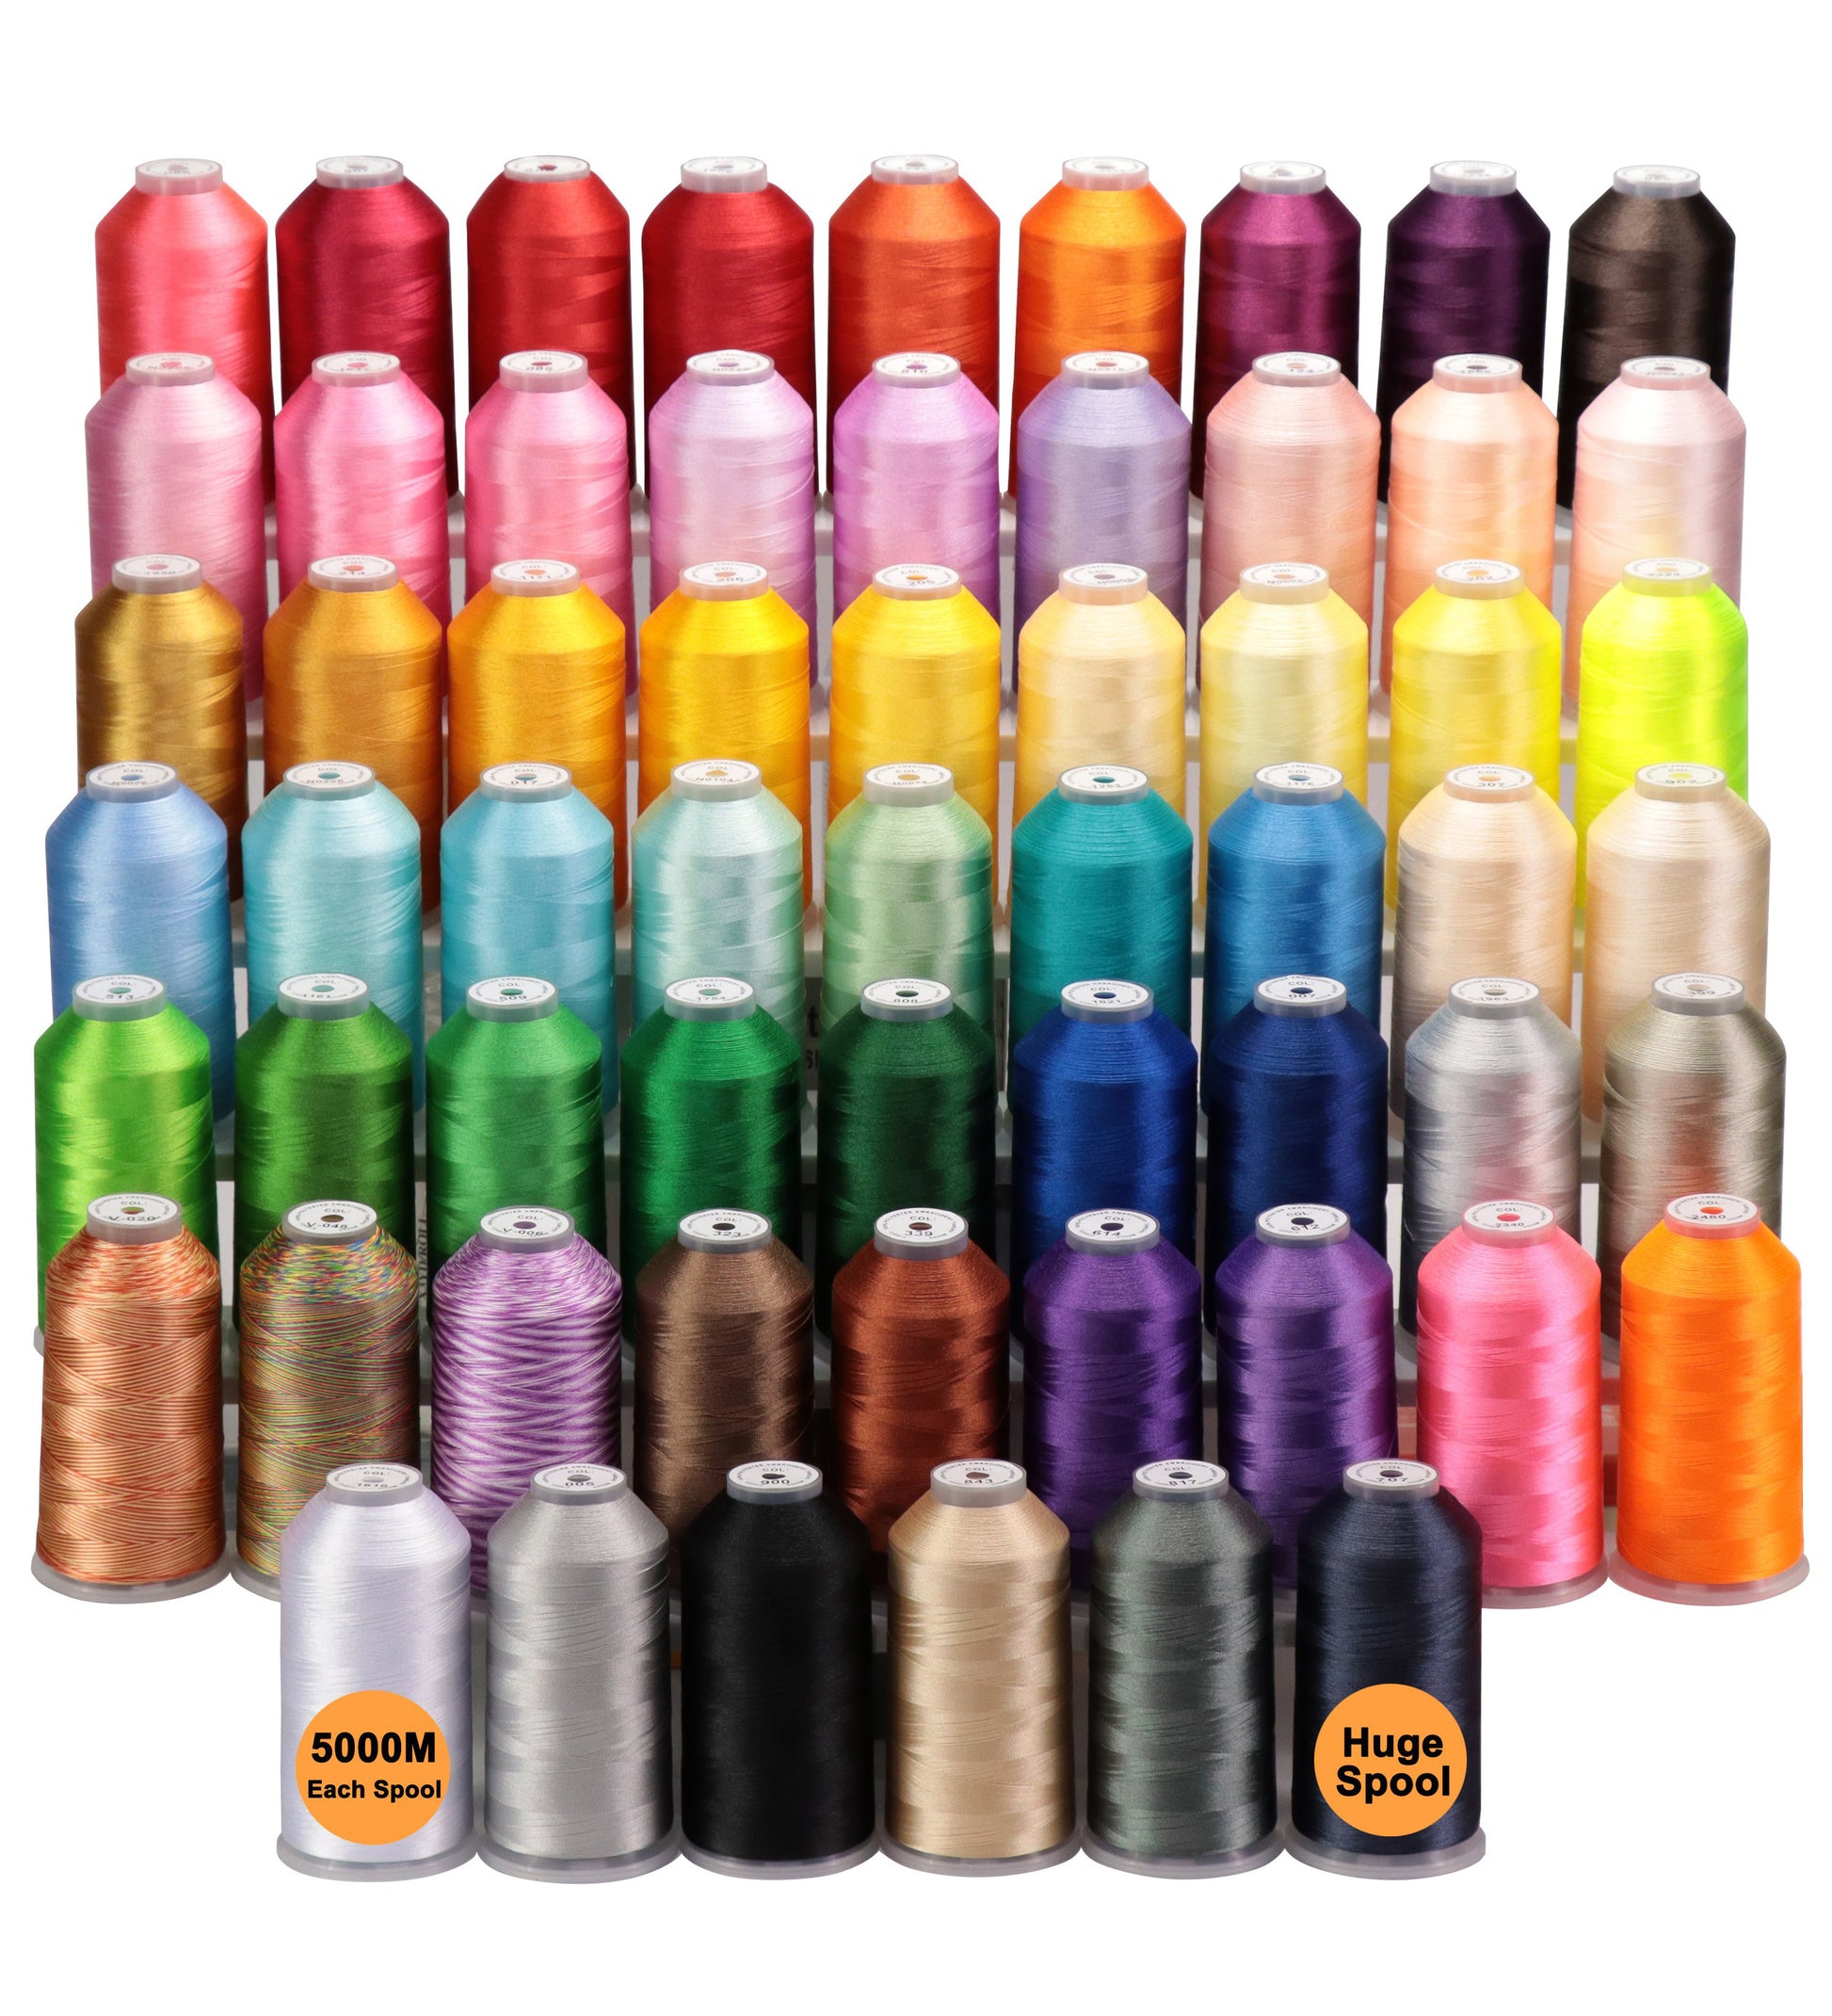 Brother Polyester Embroidery Thread - Fleshtone - 10 Pack